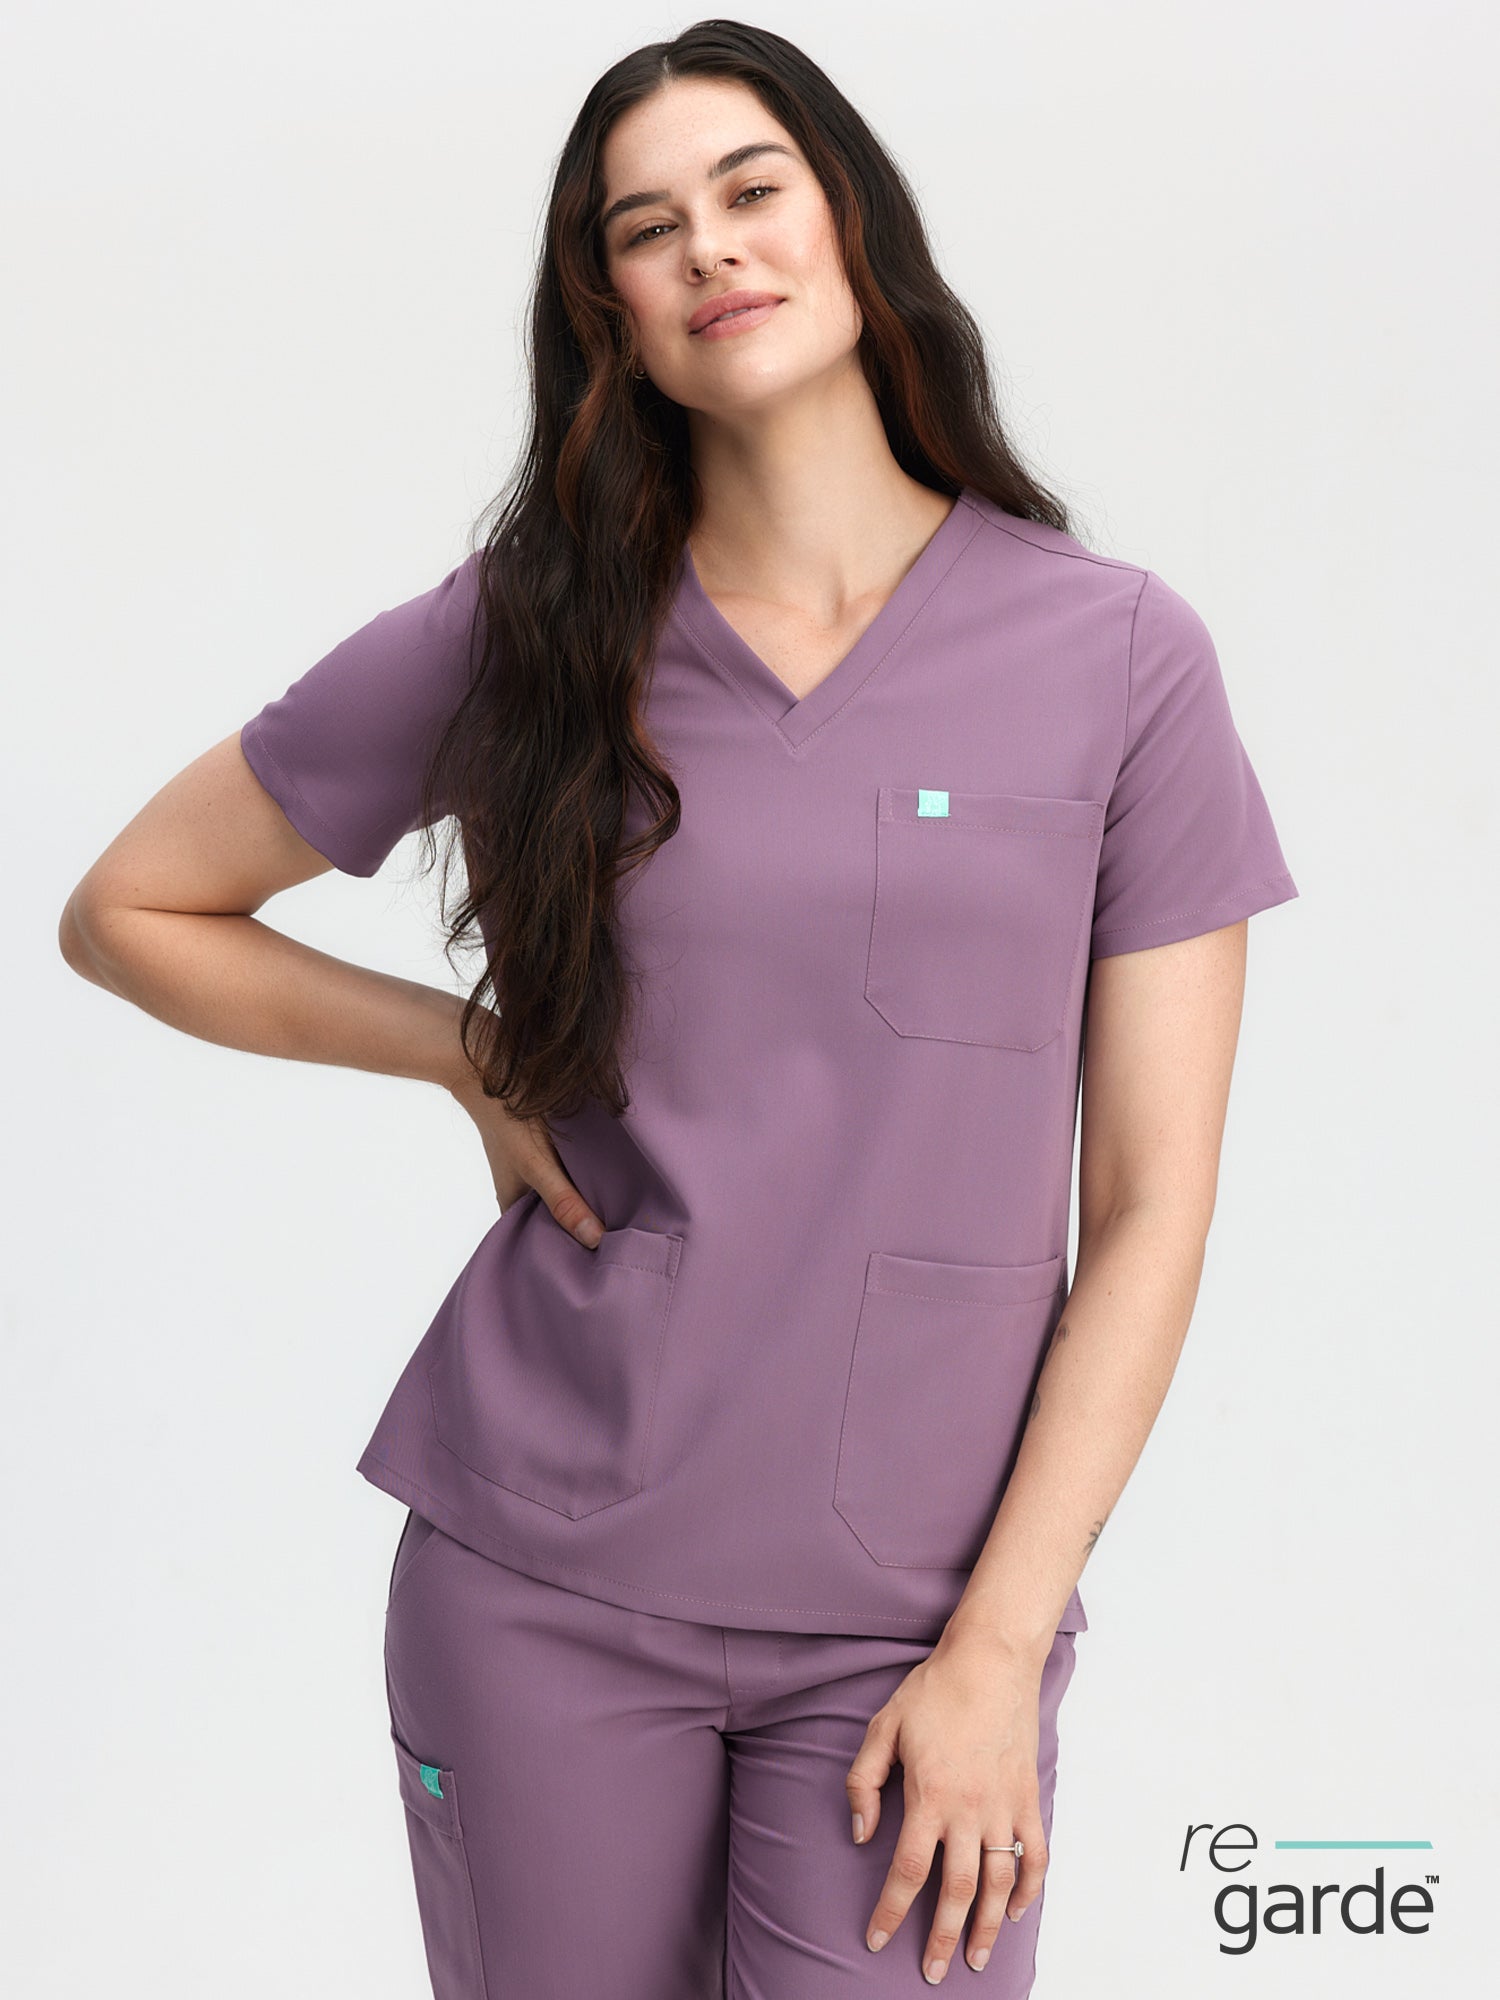 The Caswell - Purple Two-Pocket Scrub Top for Women